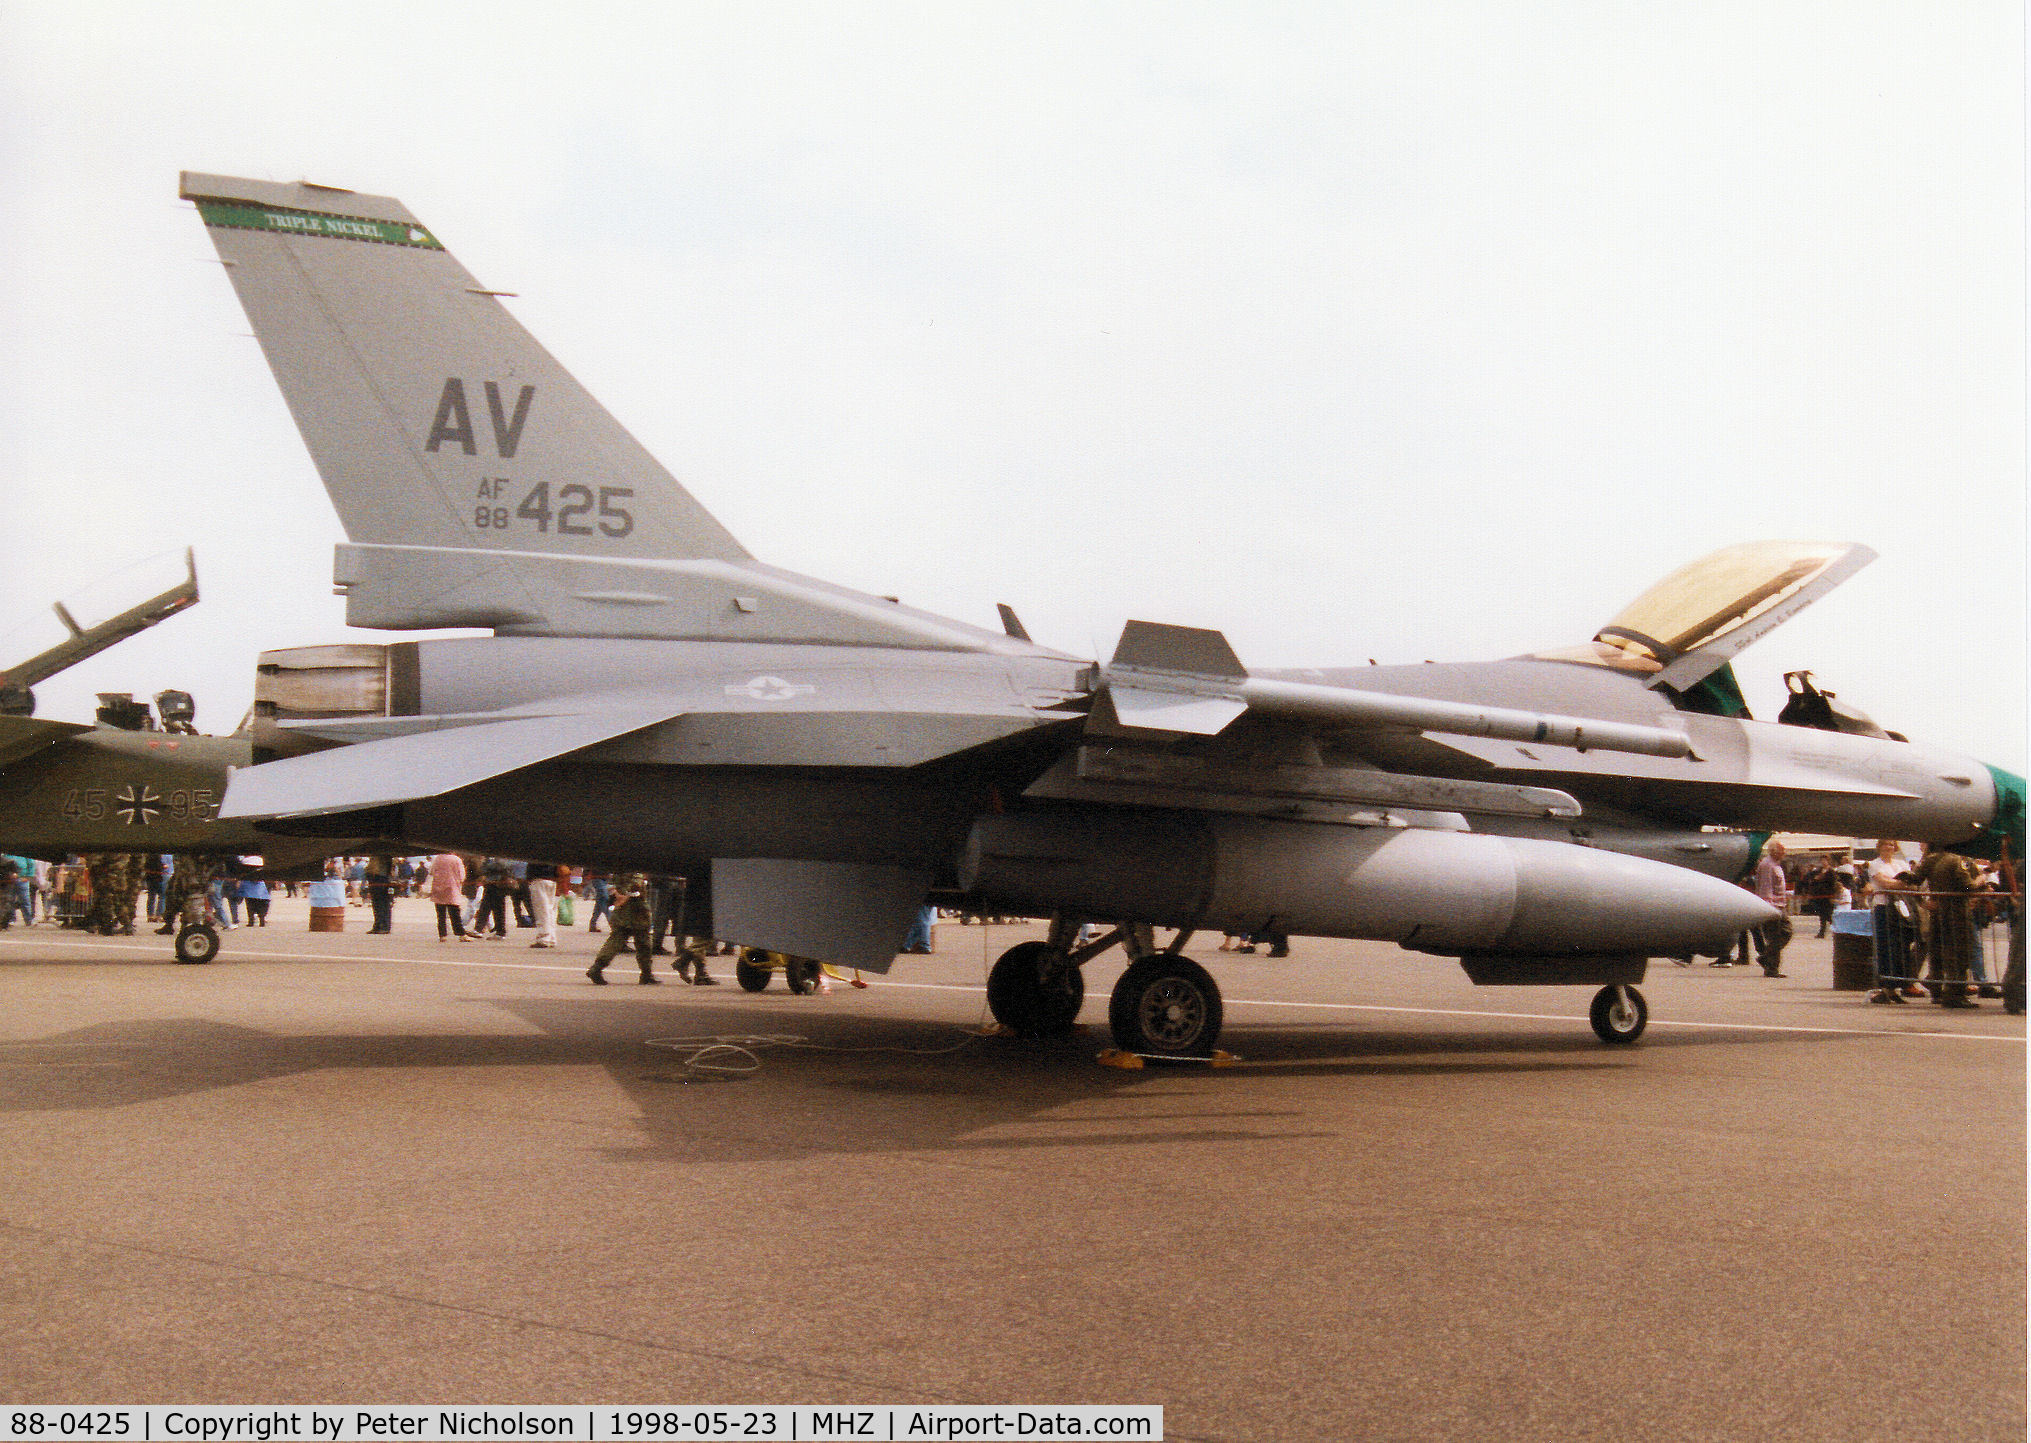 88-0425, 1988 General Dynamics F-16C Fighting Falcon C/N 1C-27, F-16C Falcon of 555th Fighter Squadron/31st Fighter Wing stationed at Aviano on display at the 1998 RAF Mildenhall Air Fete.